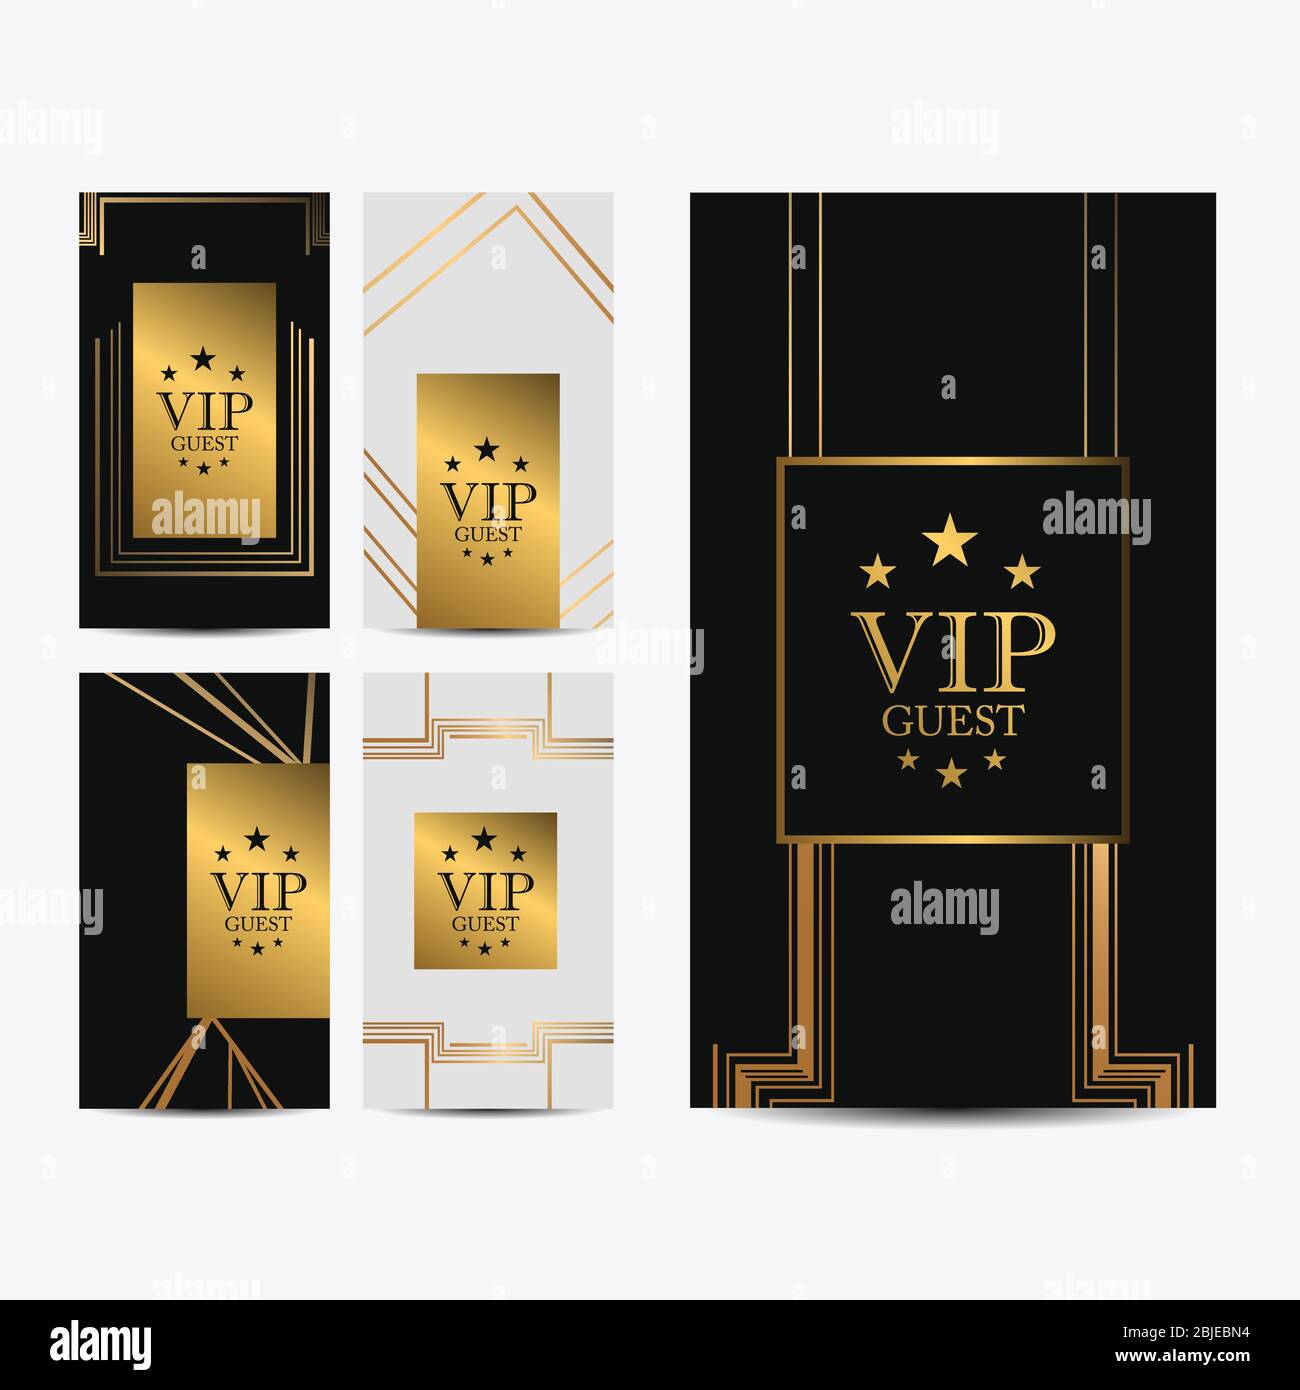 Vip Party Premium Invitation Card With Luxury Gold Design Black And Golden Design Template Decorative Background With Ornament Pattern Stock Vector Image Art Alamy